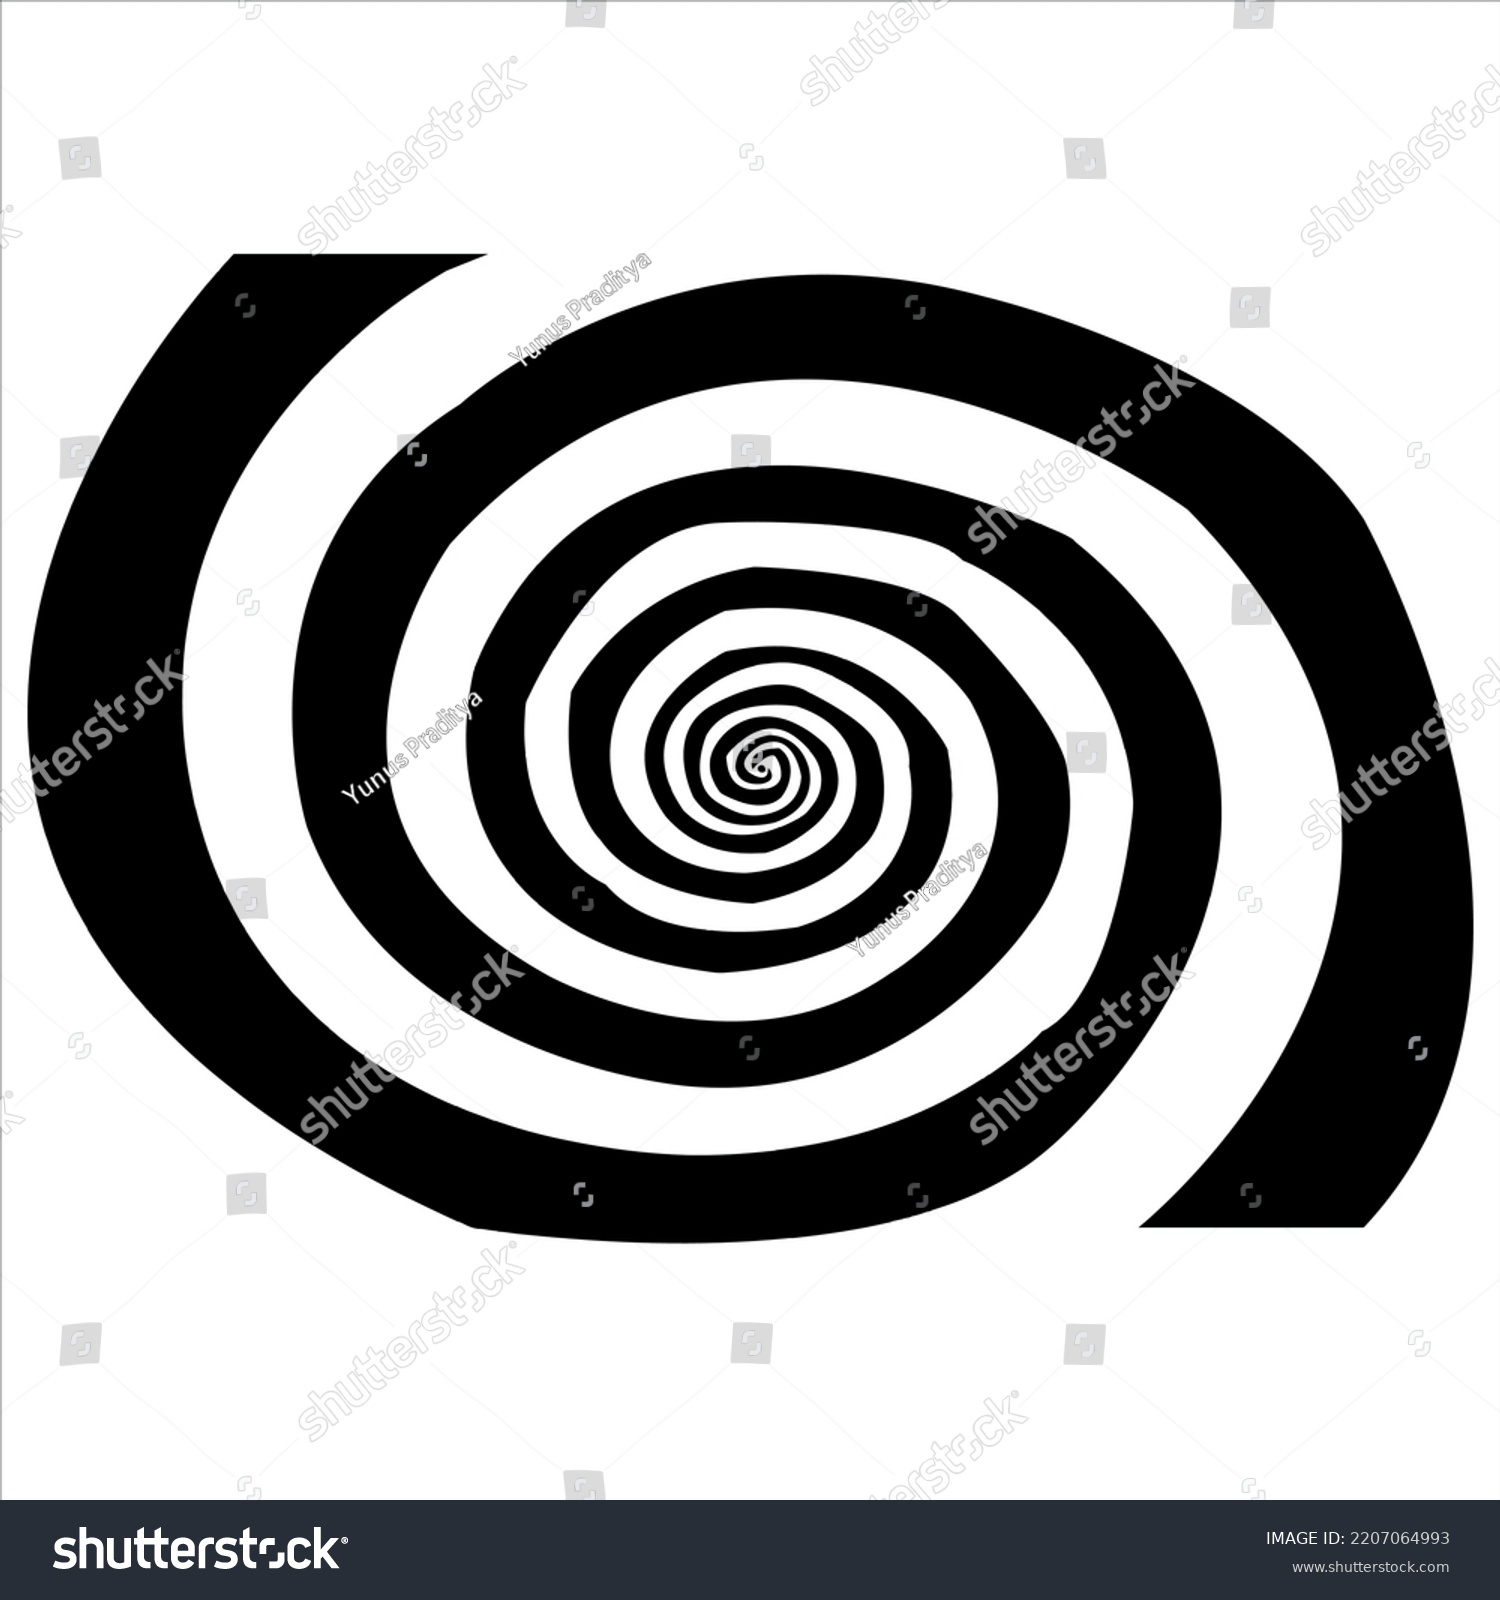 Black White Spiral Optical Illusion Stock Vector Royalty Free 2207064993 Shutterstock 